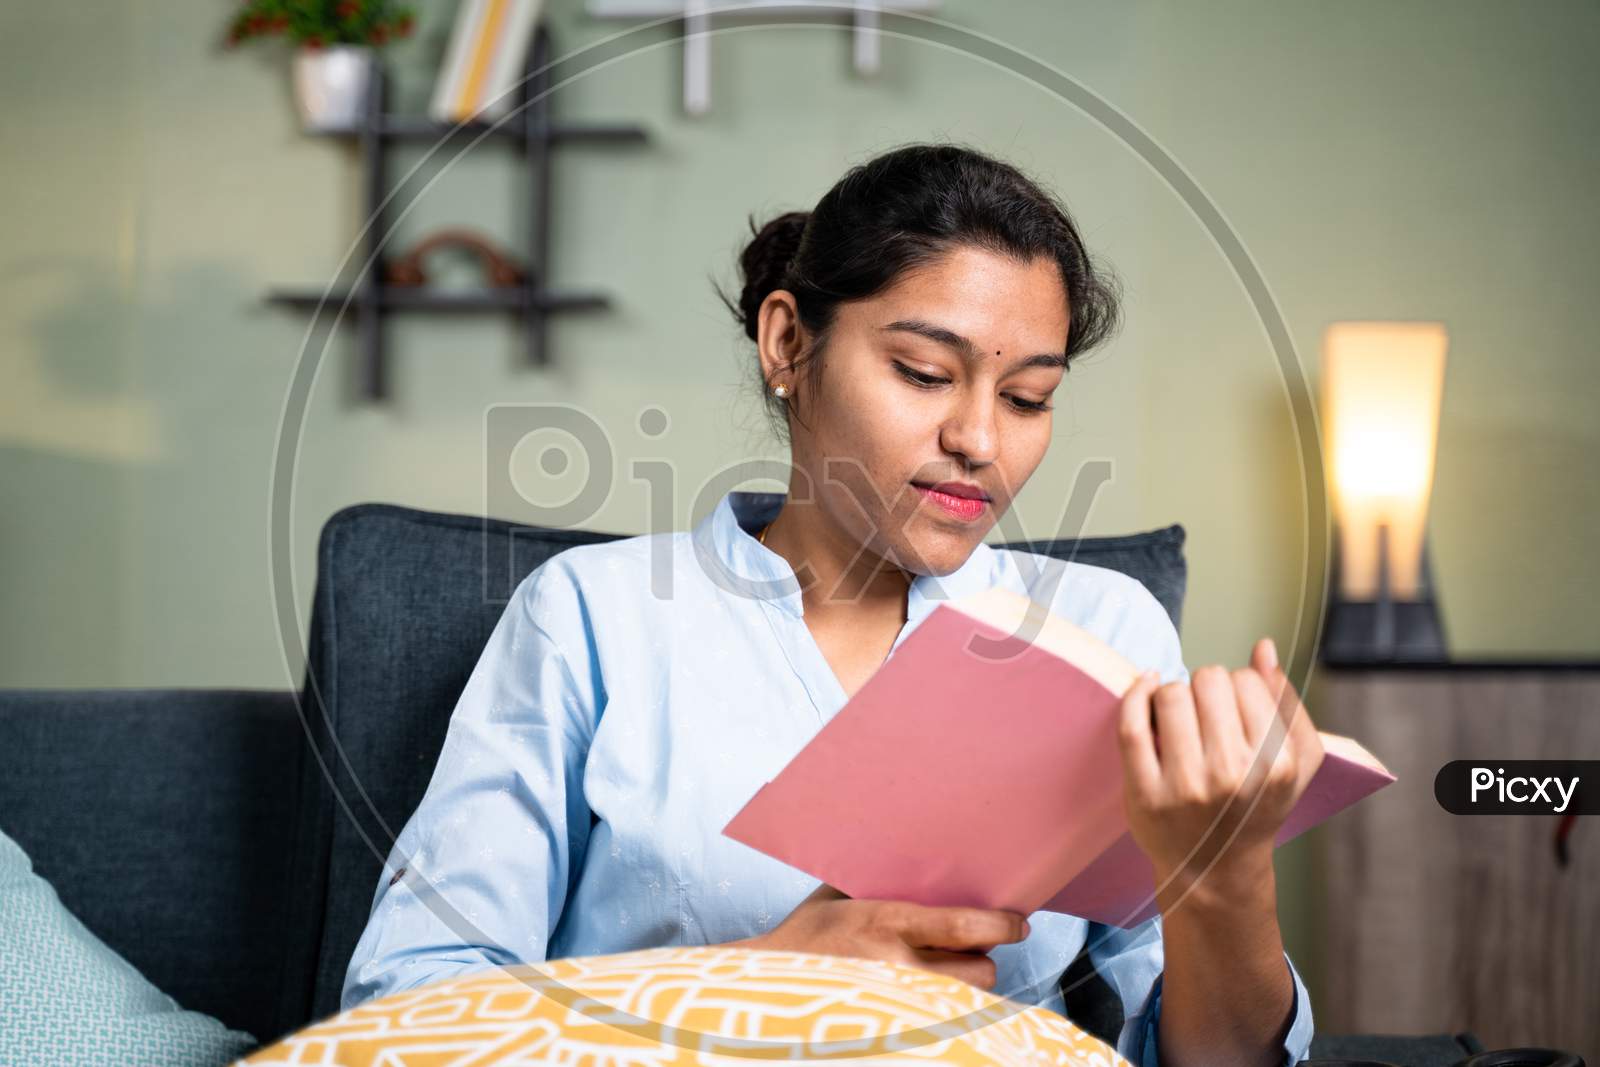 Concentrated Young Girl Reading Book Or Studying During Leisure Time Or For Examination At Home By Sitting On Sofa - Concept Of Reading Hobby.